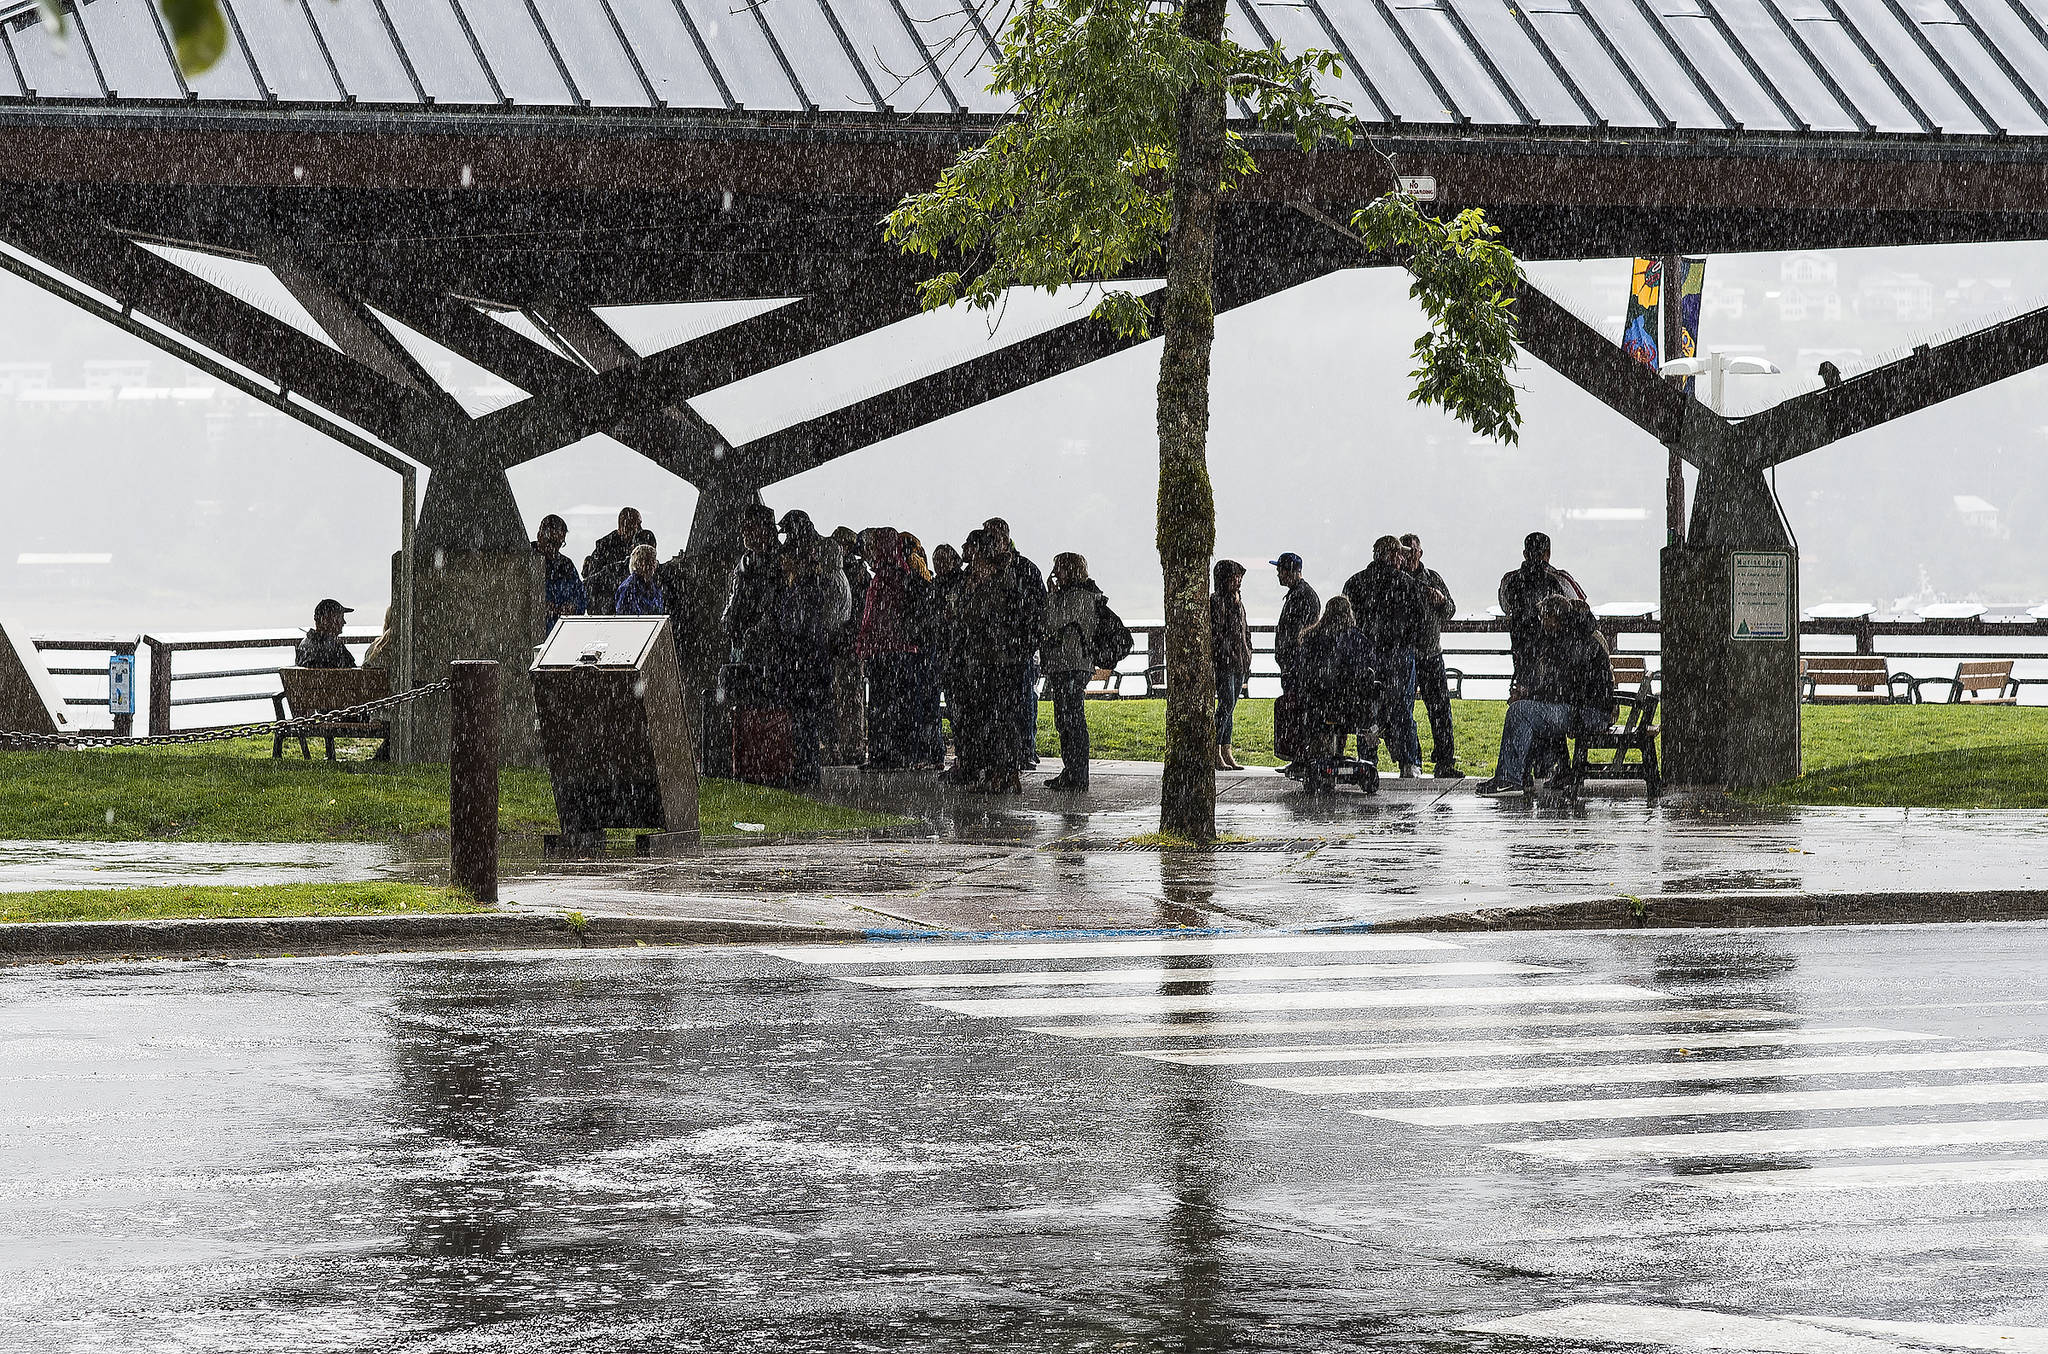 Tourists take shelter at Marine Park during a heavy rain shower on Monday, Aug. 14, 2017. (Michael Penn | Juneau Empire)